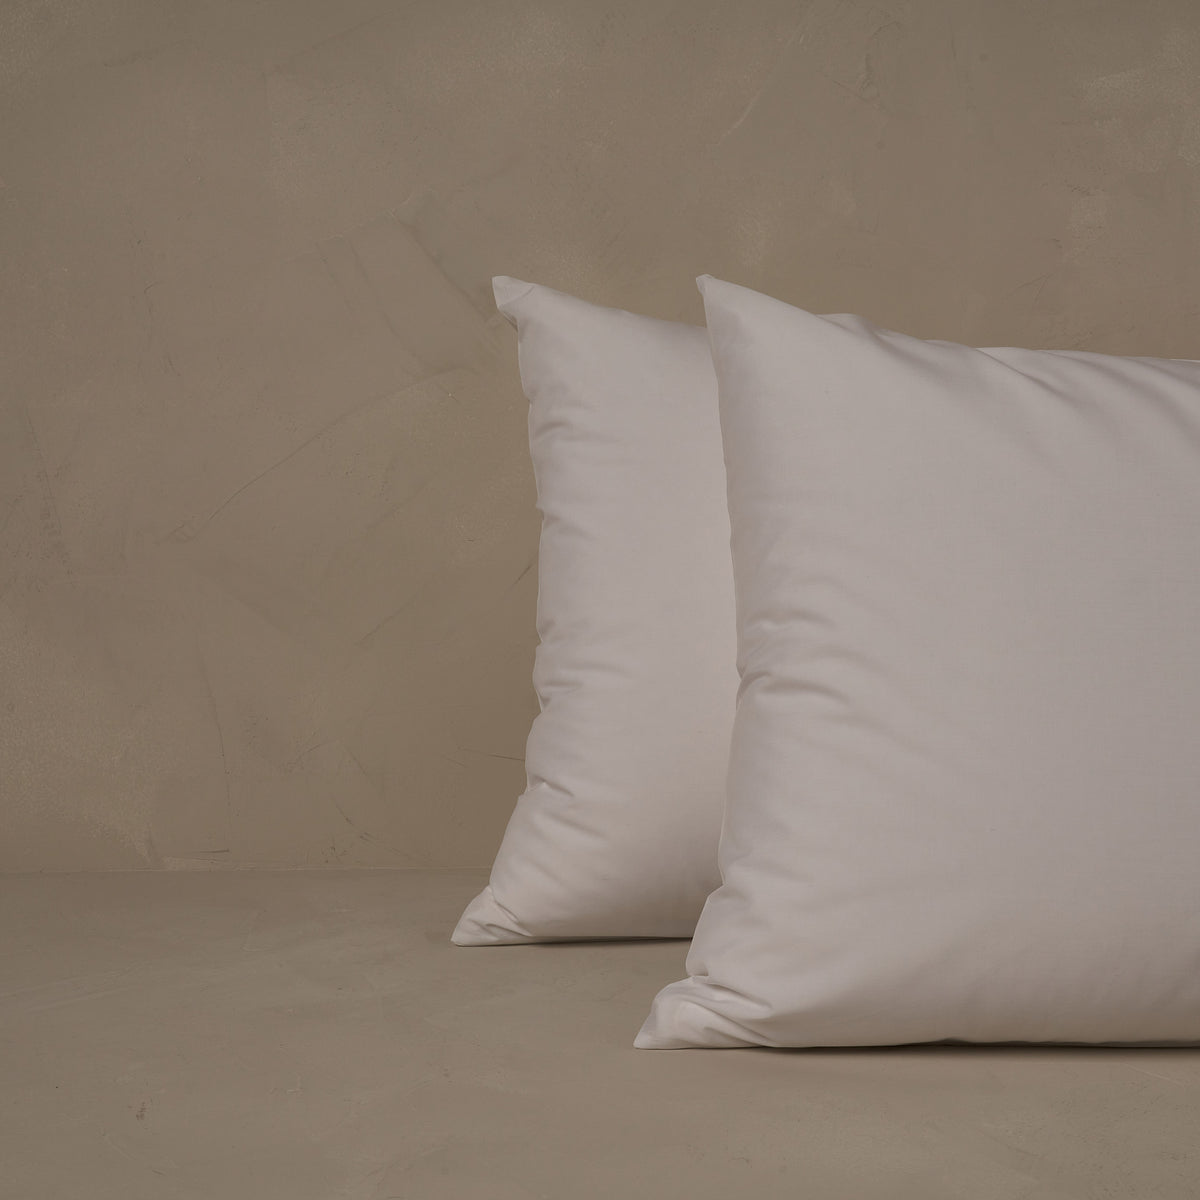 An image of two pillows stacked one in front of the other. The pillow cases are made of LETTO's cool and crisp Classic Cotton Percale in color white. data-image-id=